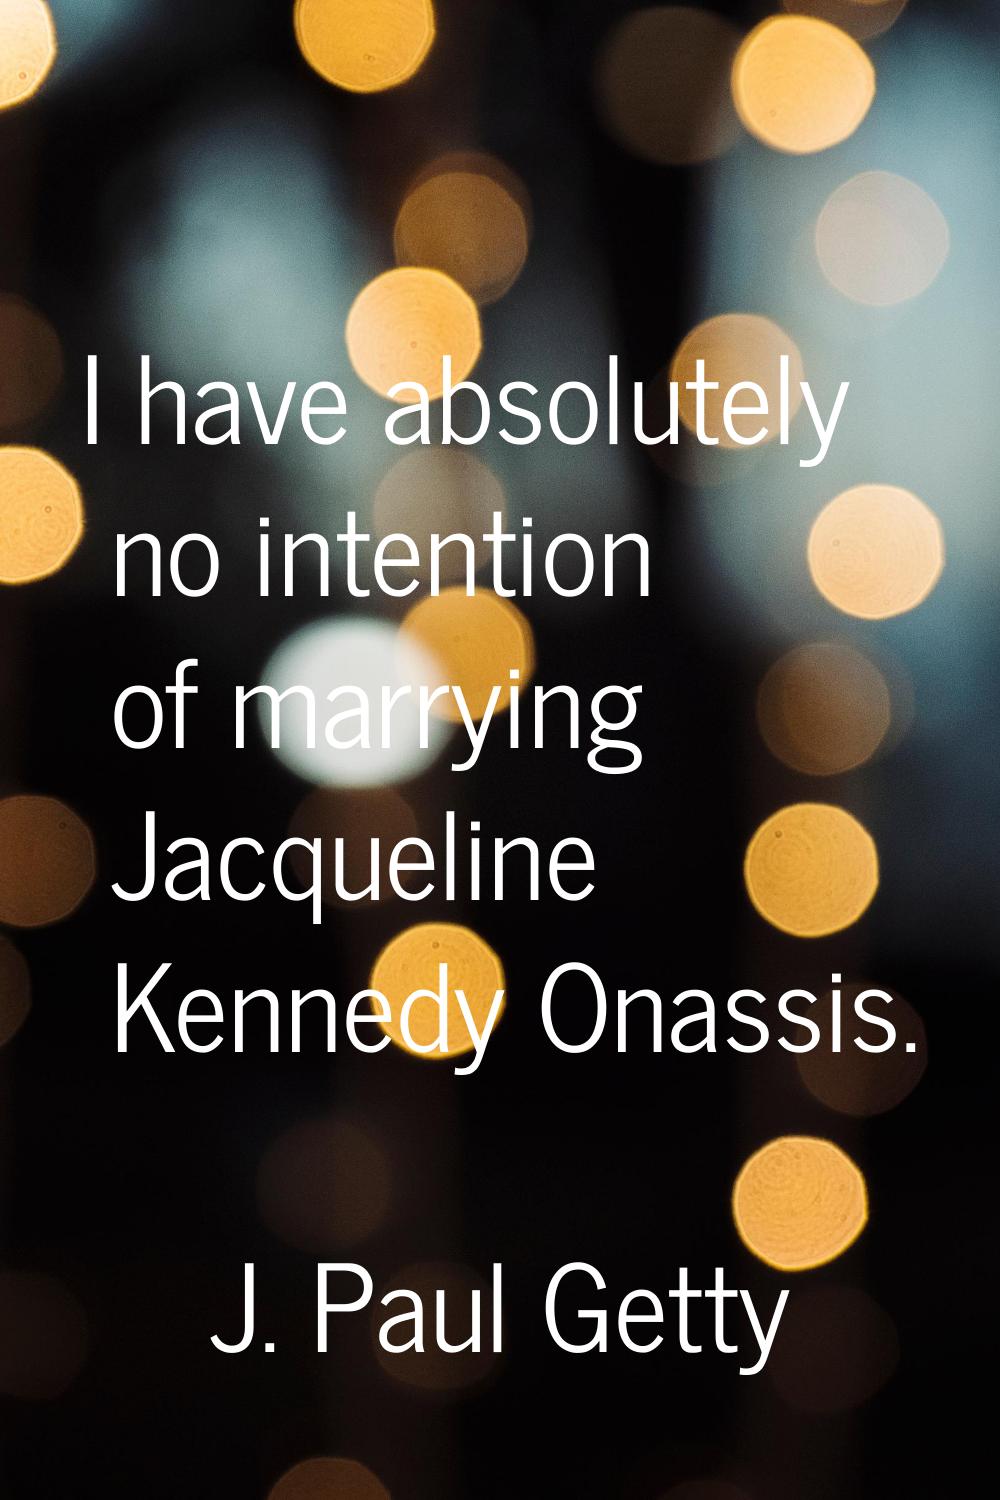 I have absolutely no intention of marrying Jacqueline Kennedy Onassis.